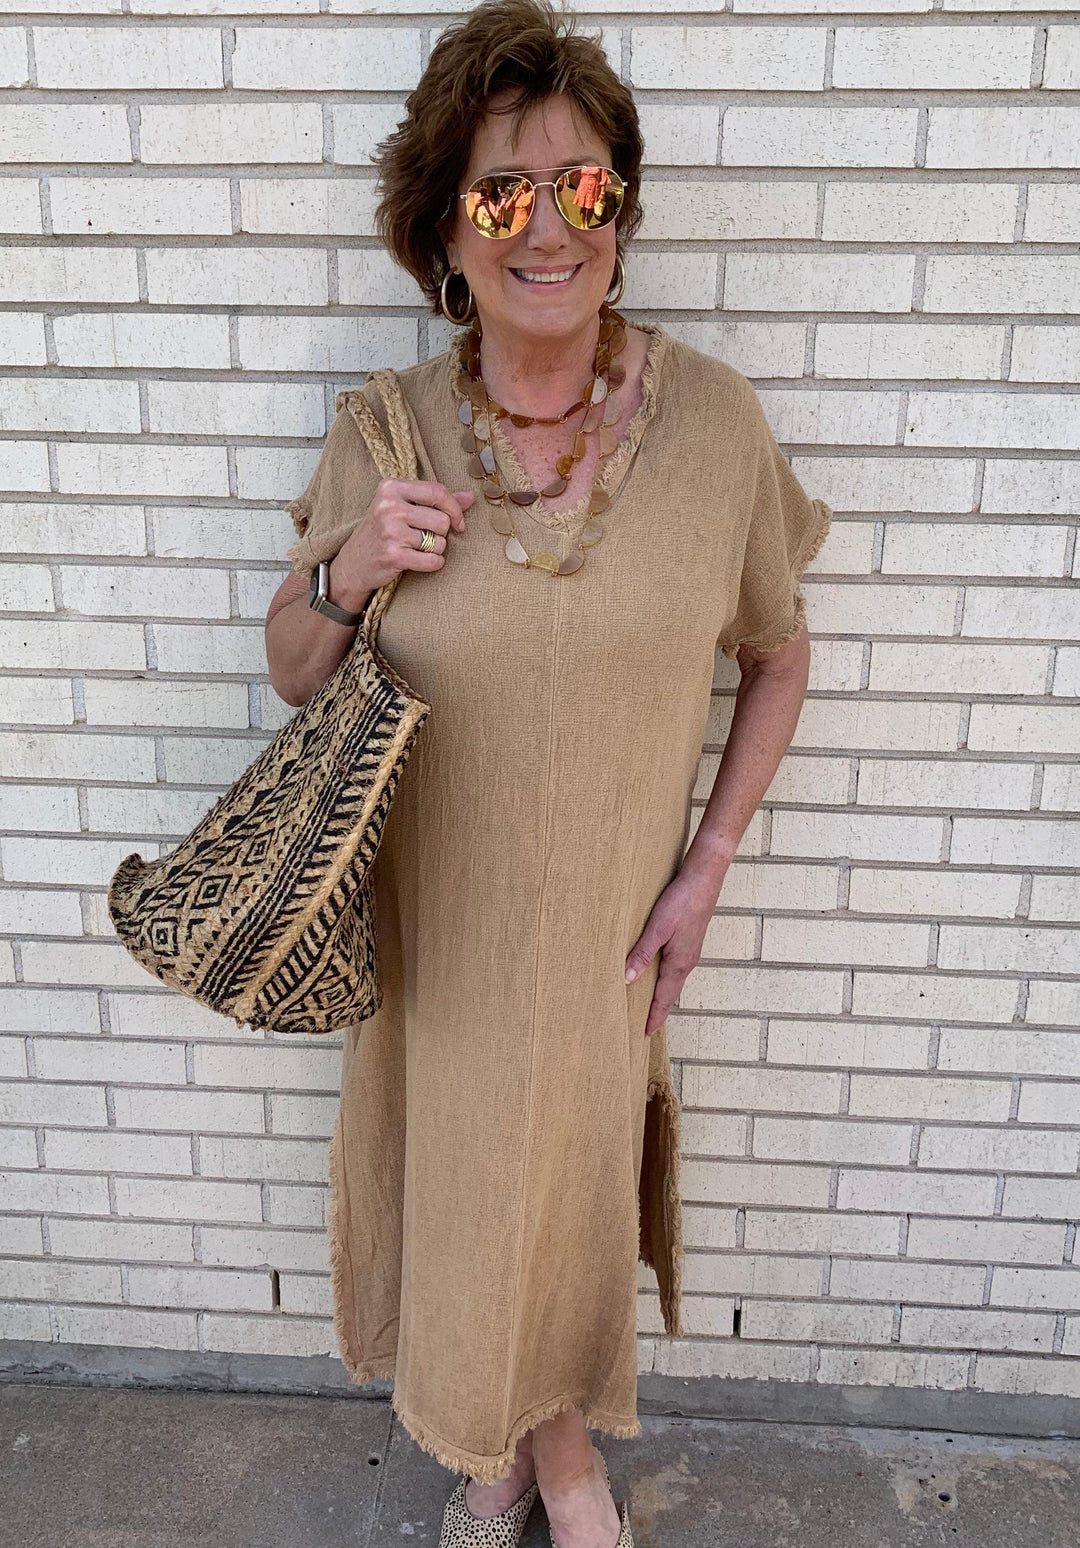 Women's boutique owner that serves the downtown, midtown, katy, and memorial areas